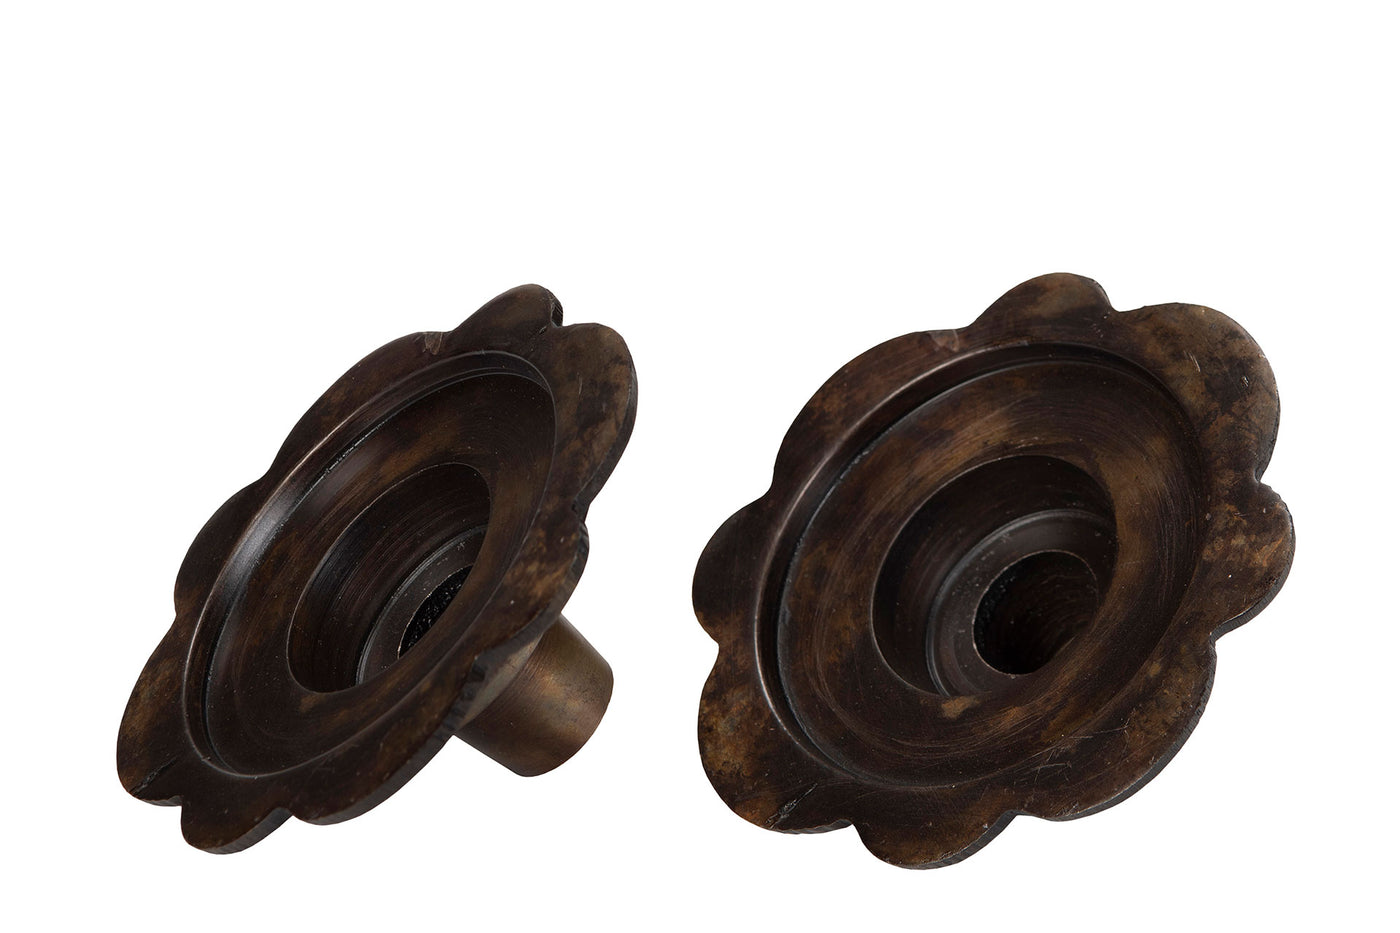 Multi-Candle Holder - Old Brown